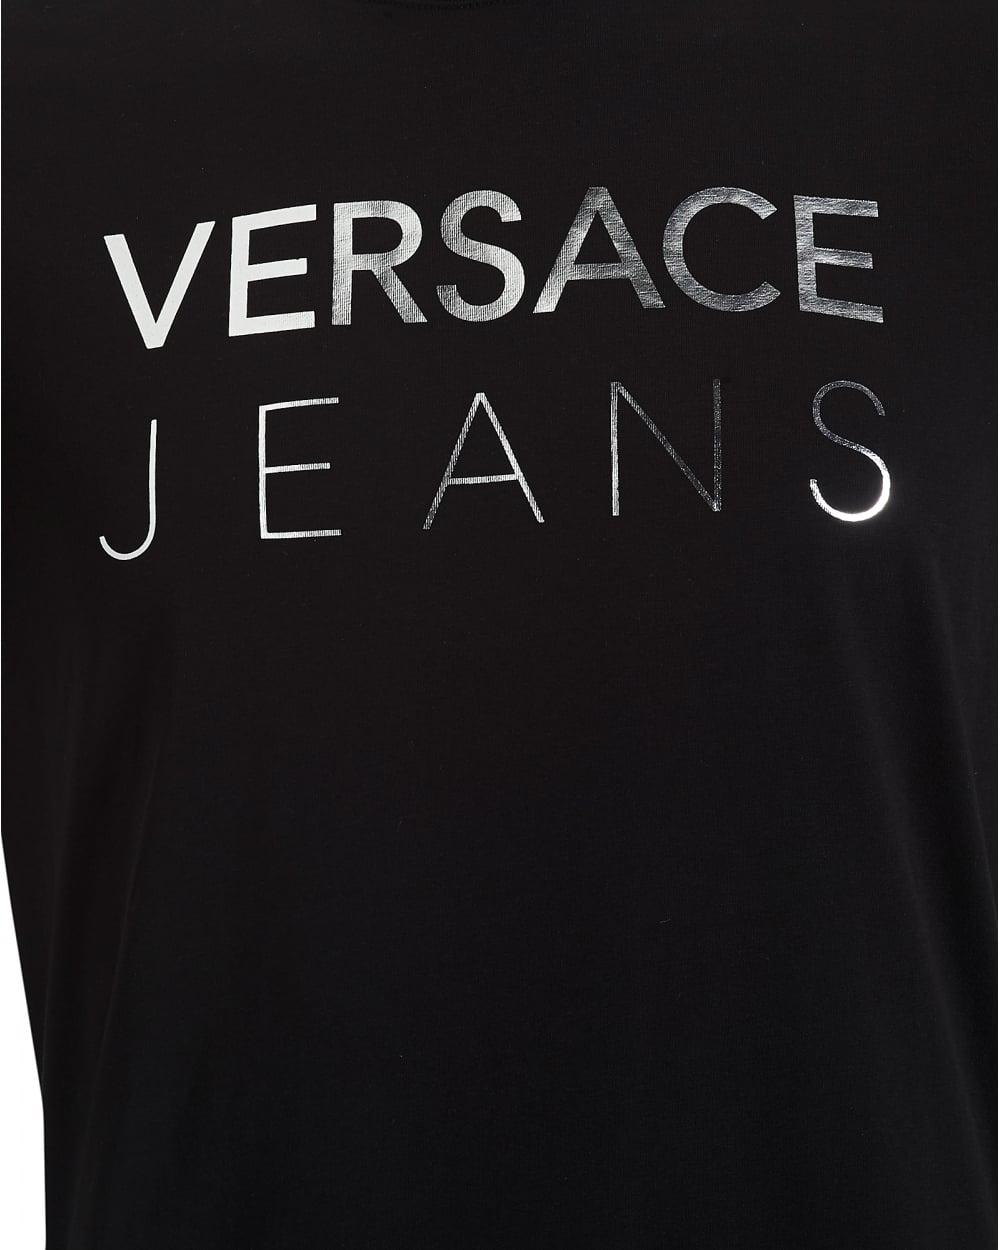 Black and Silver Logo - Versace Jeans Mens Black T-Shirt, Slim Fit Silver Logo Text Tee